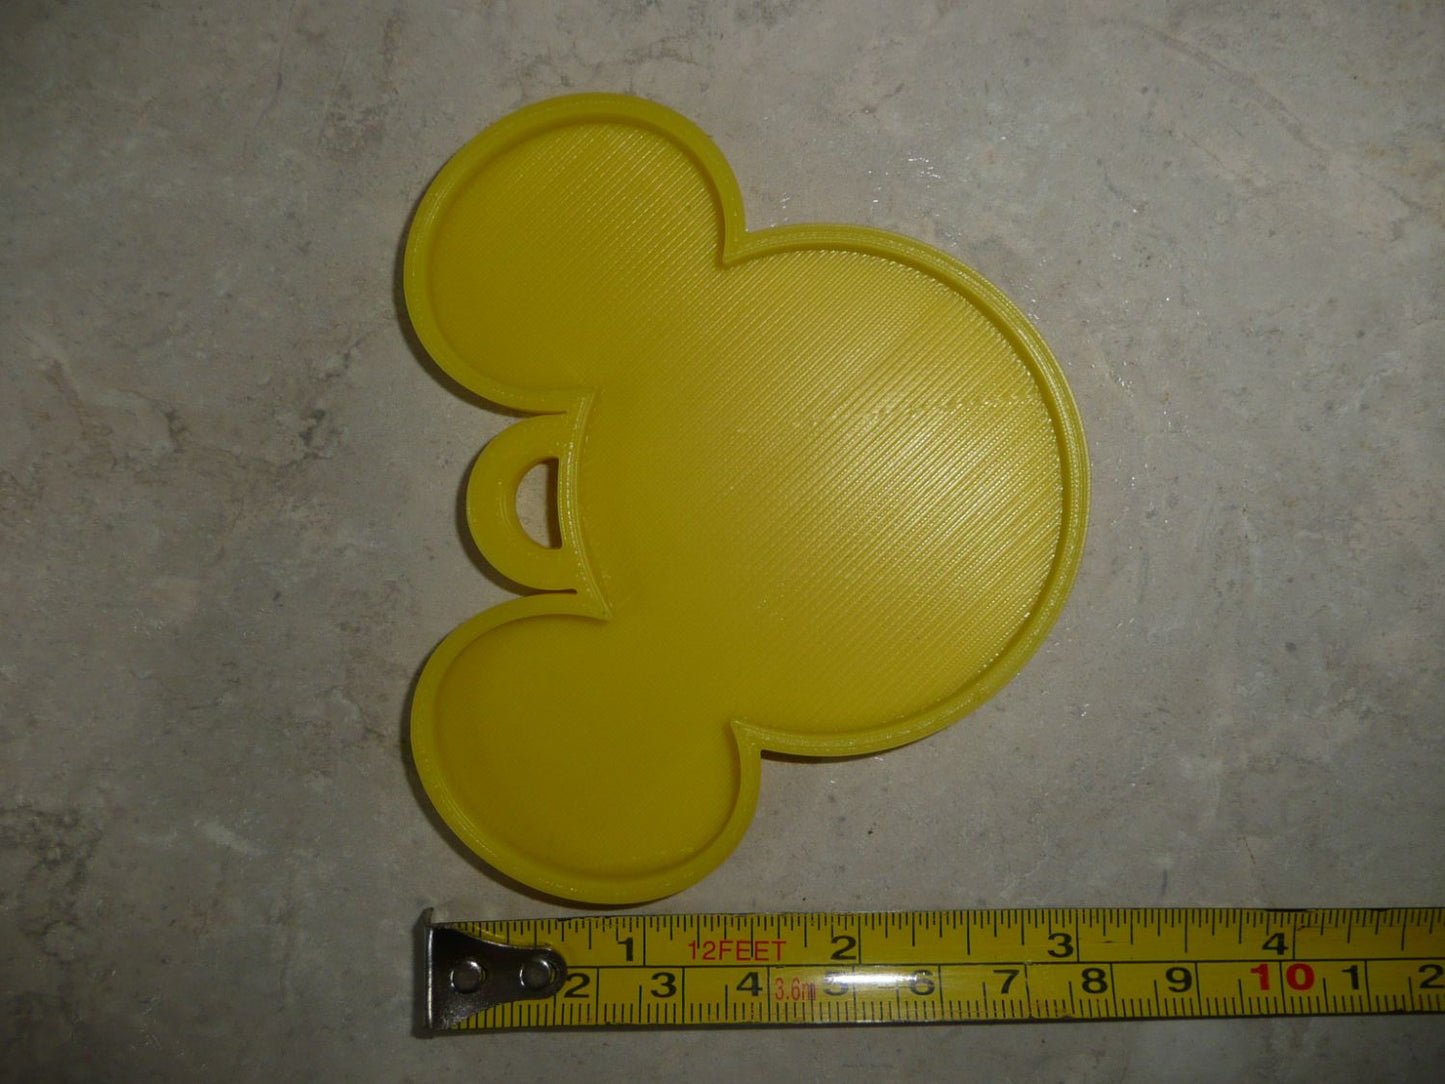 Mickey Mouse Face Ears Shape Yellow Christmas Ornament Made In USA PR4873